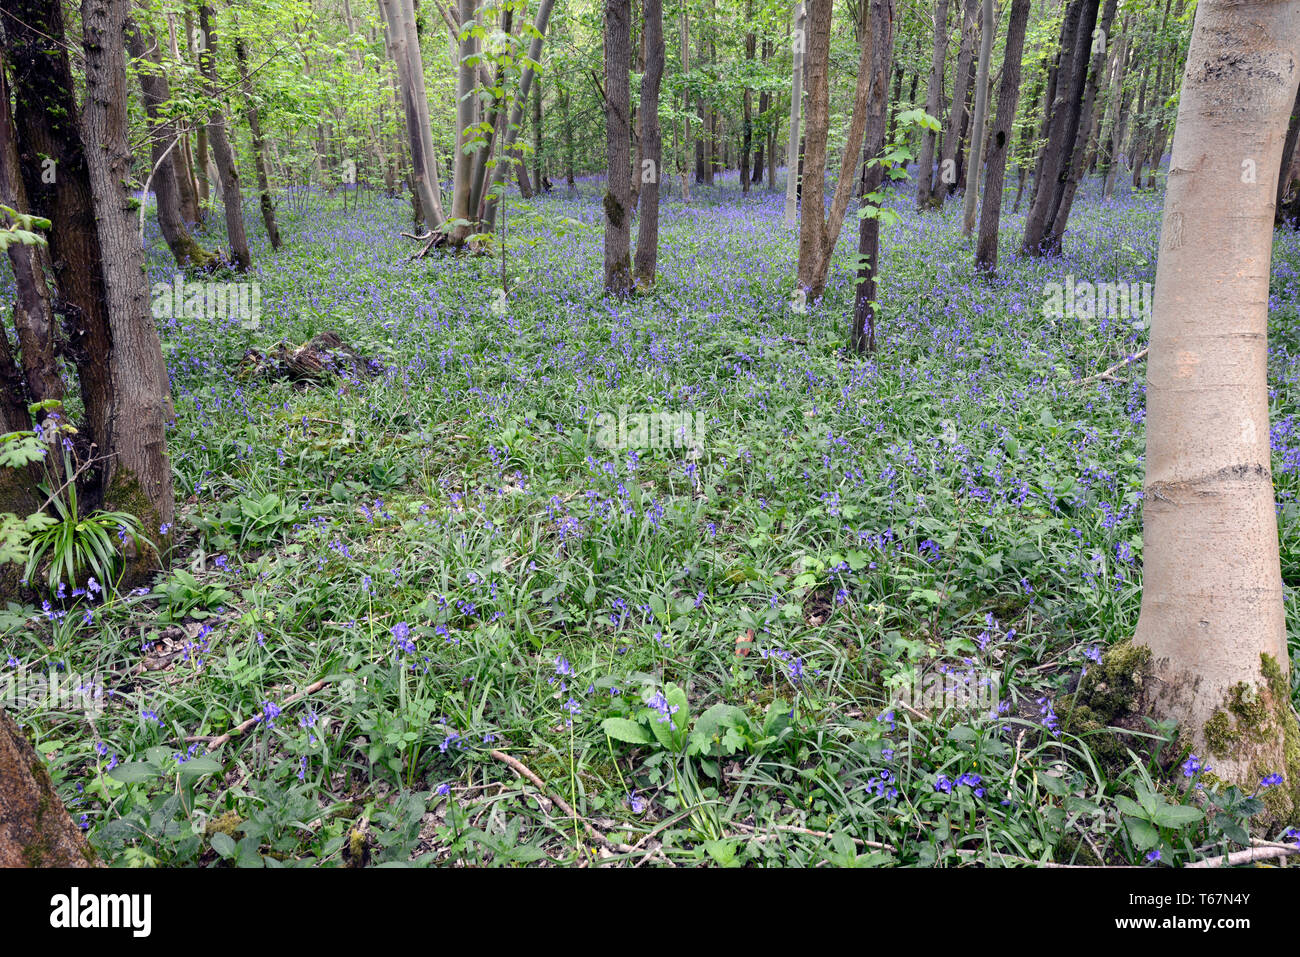 Bluebells carpet the forest floor of the ancient woodland at Waresley Wood, Great Gransden, Cambridgeshire, England Stock Photo